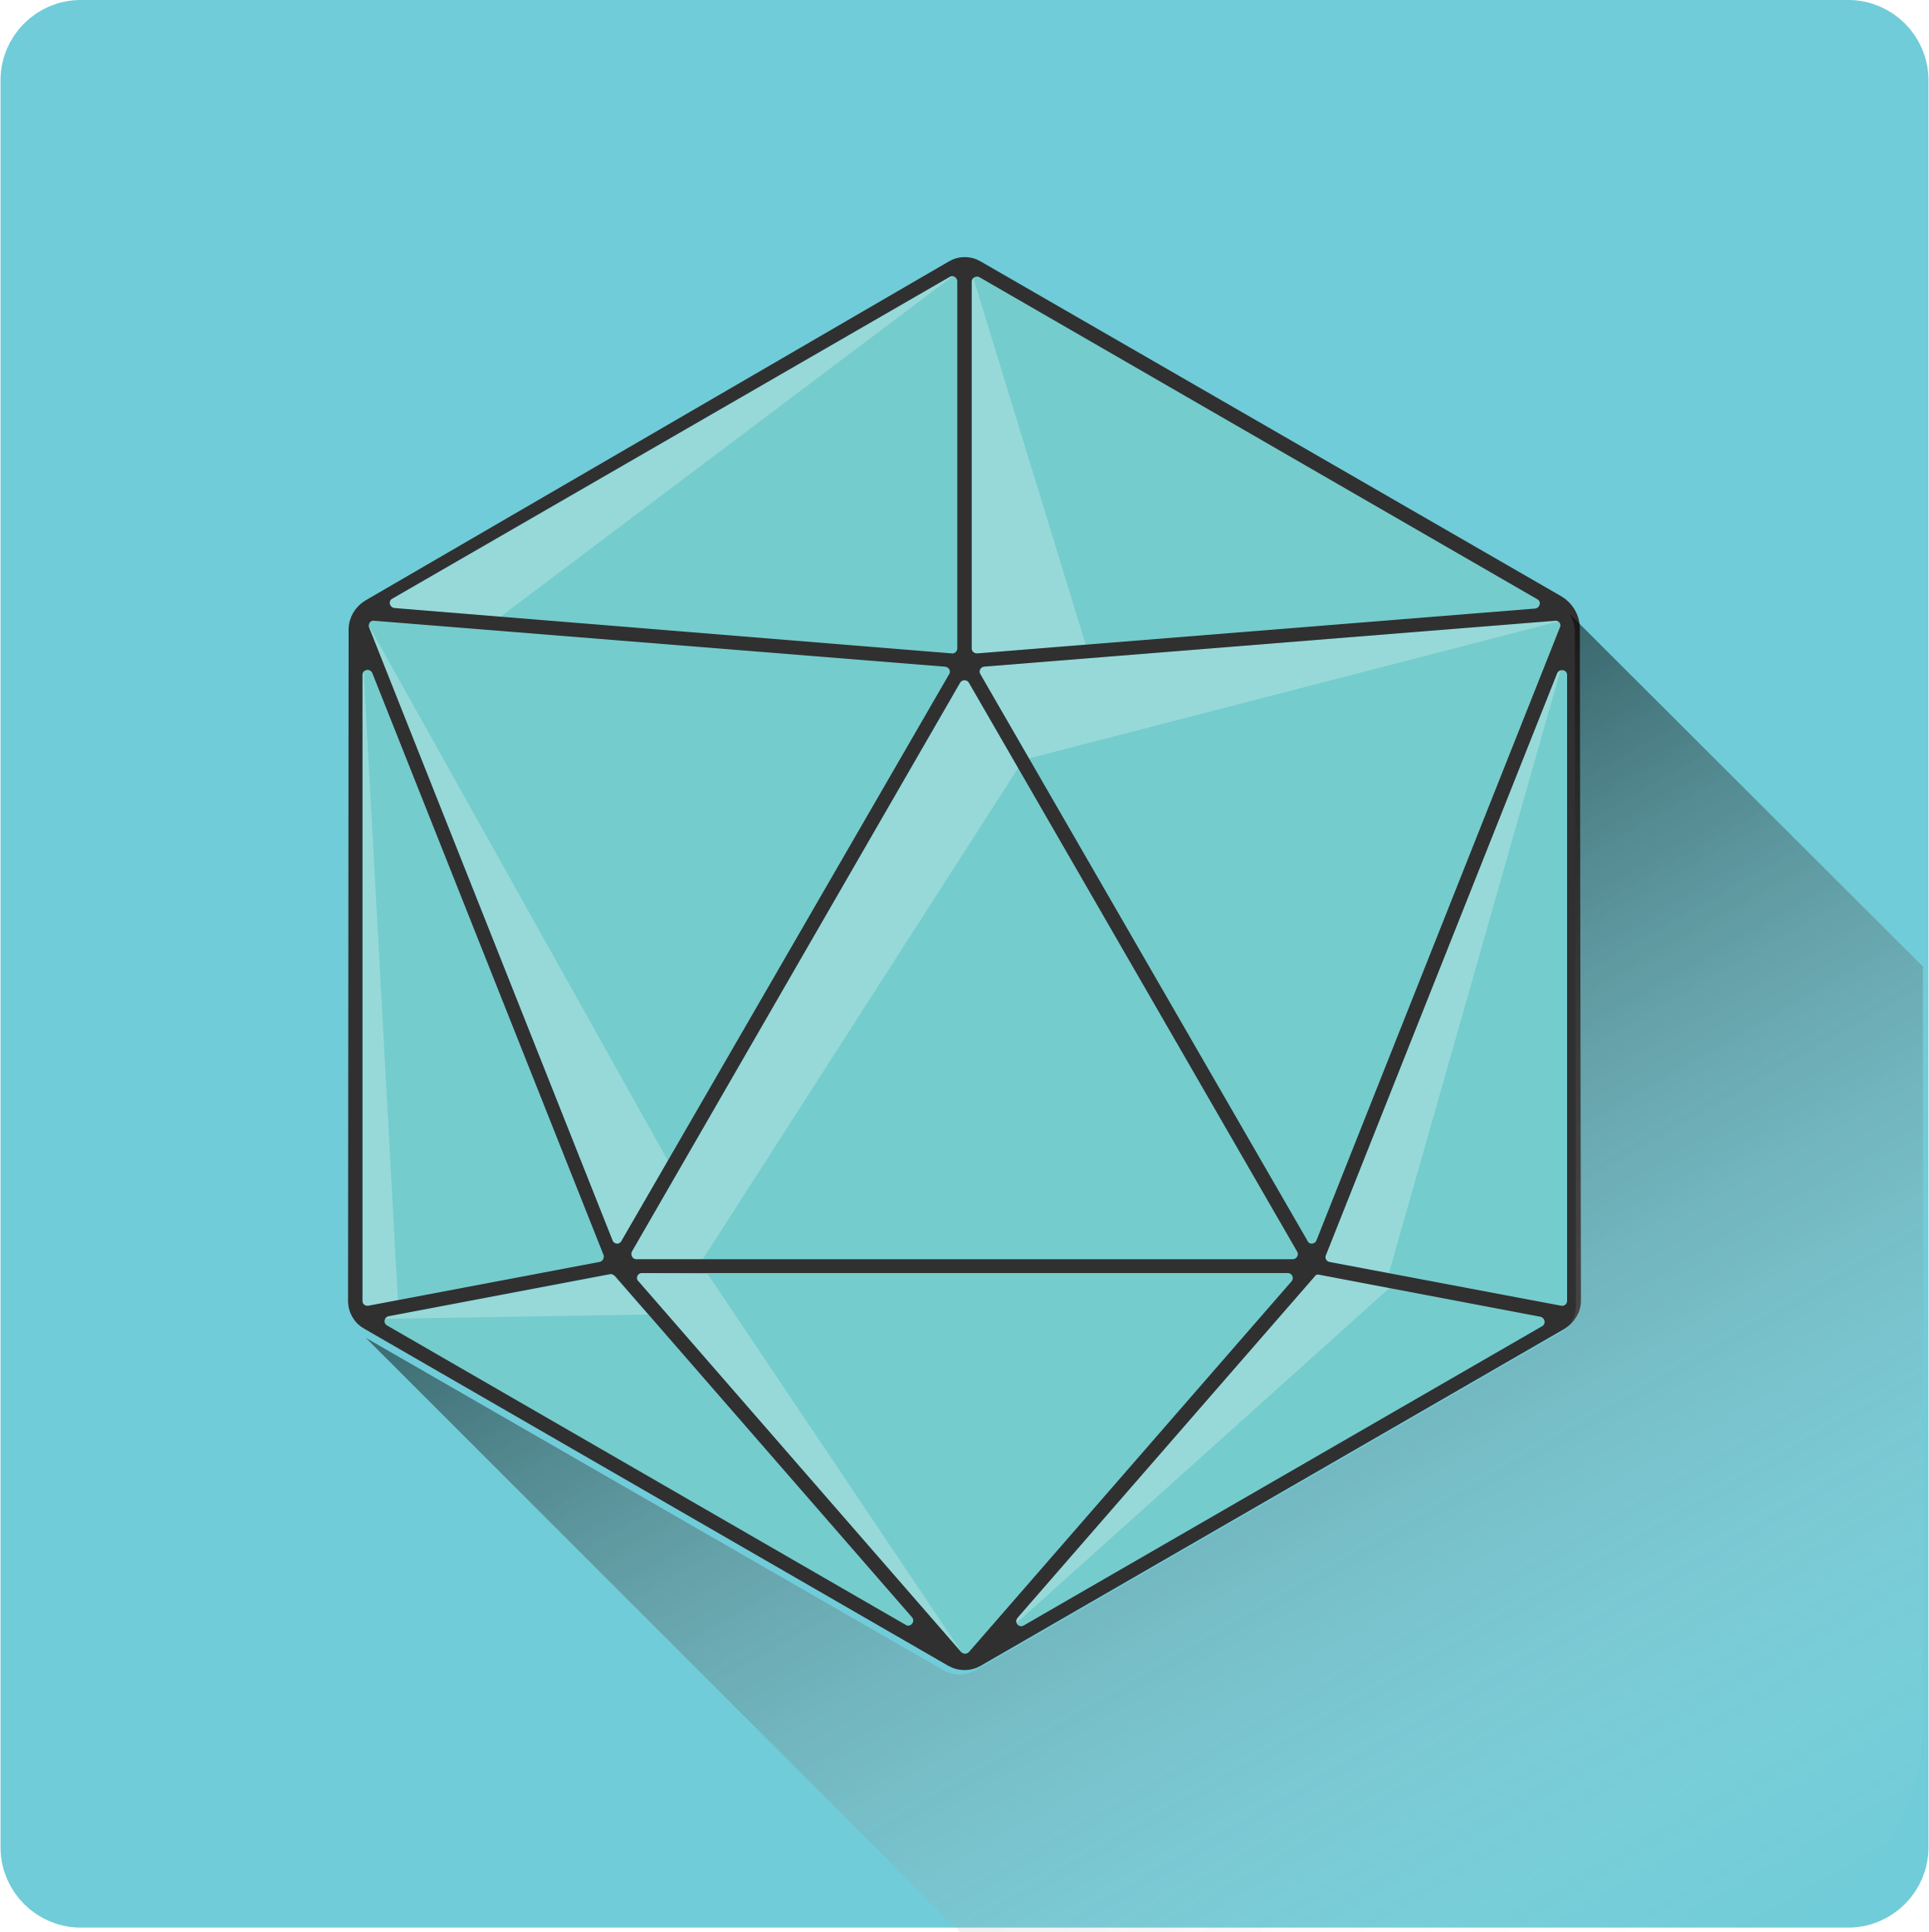 Shadowed 20 Sided Dice Icon By Cinemacookie